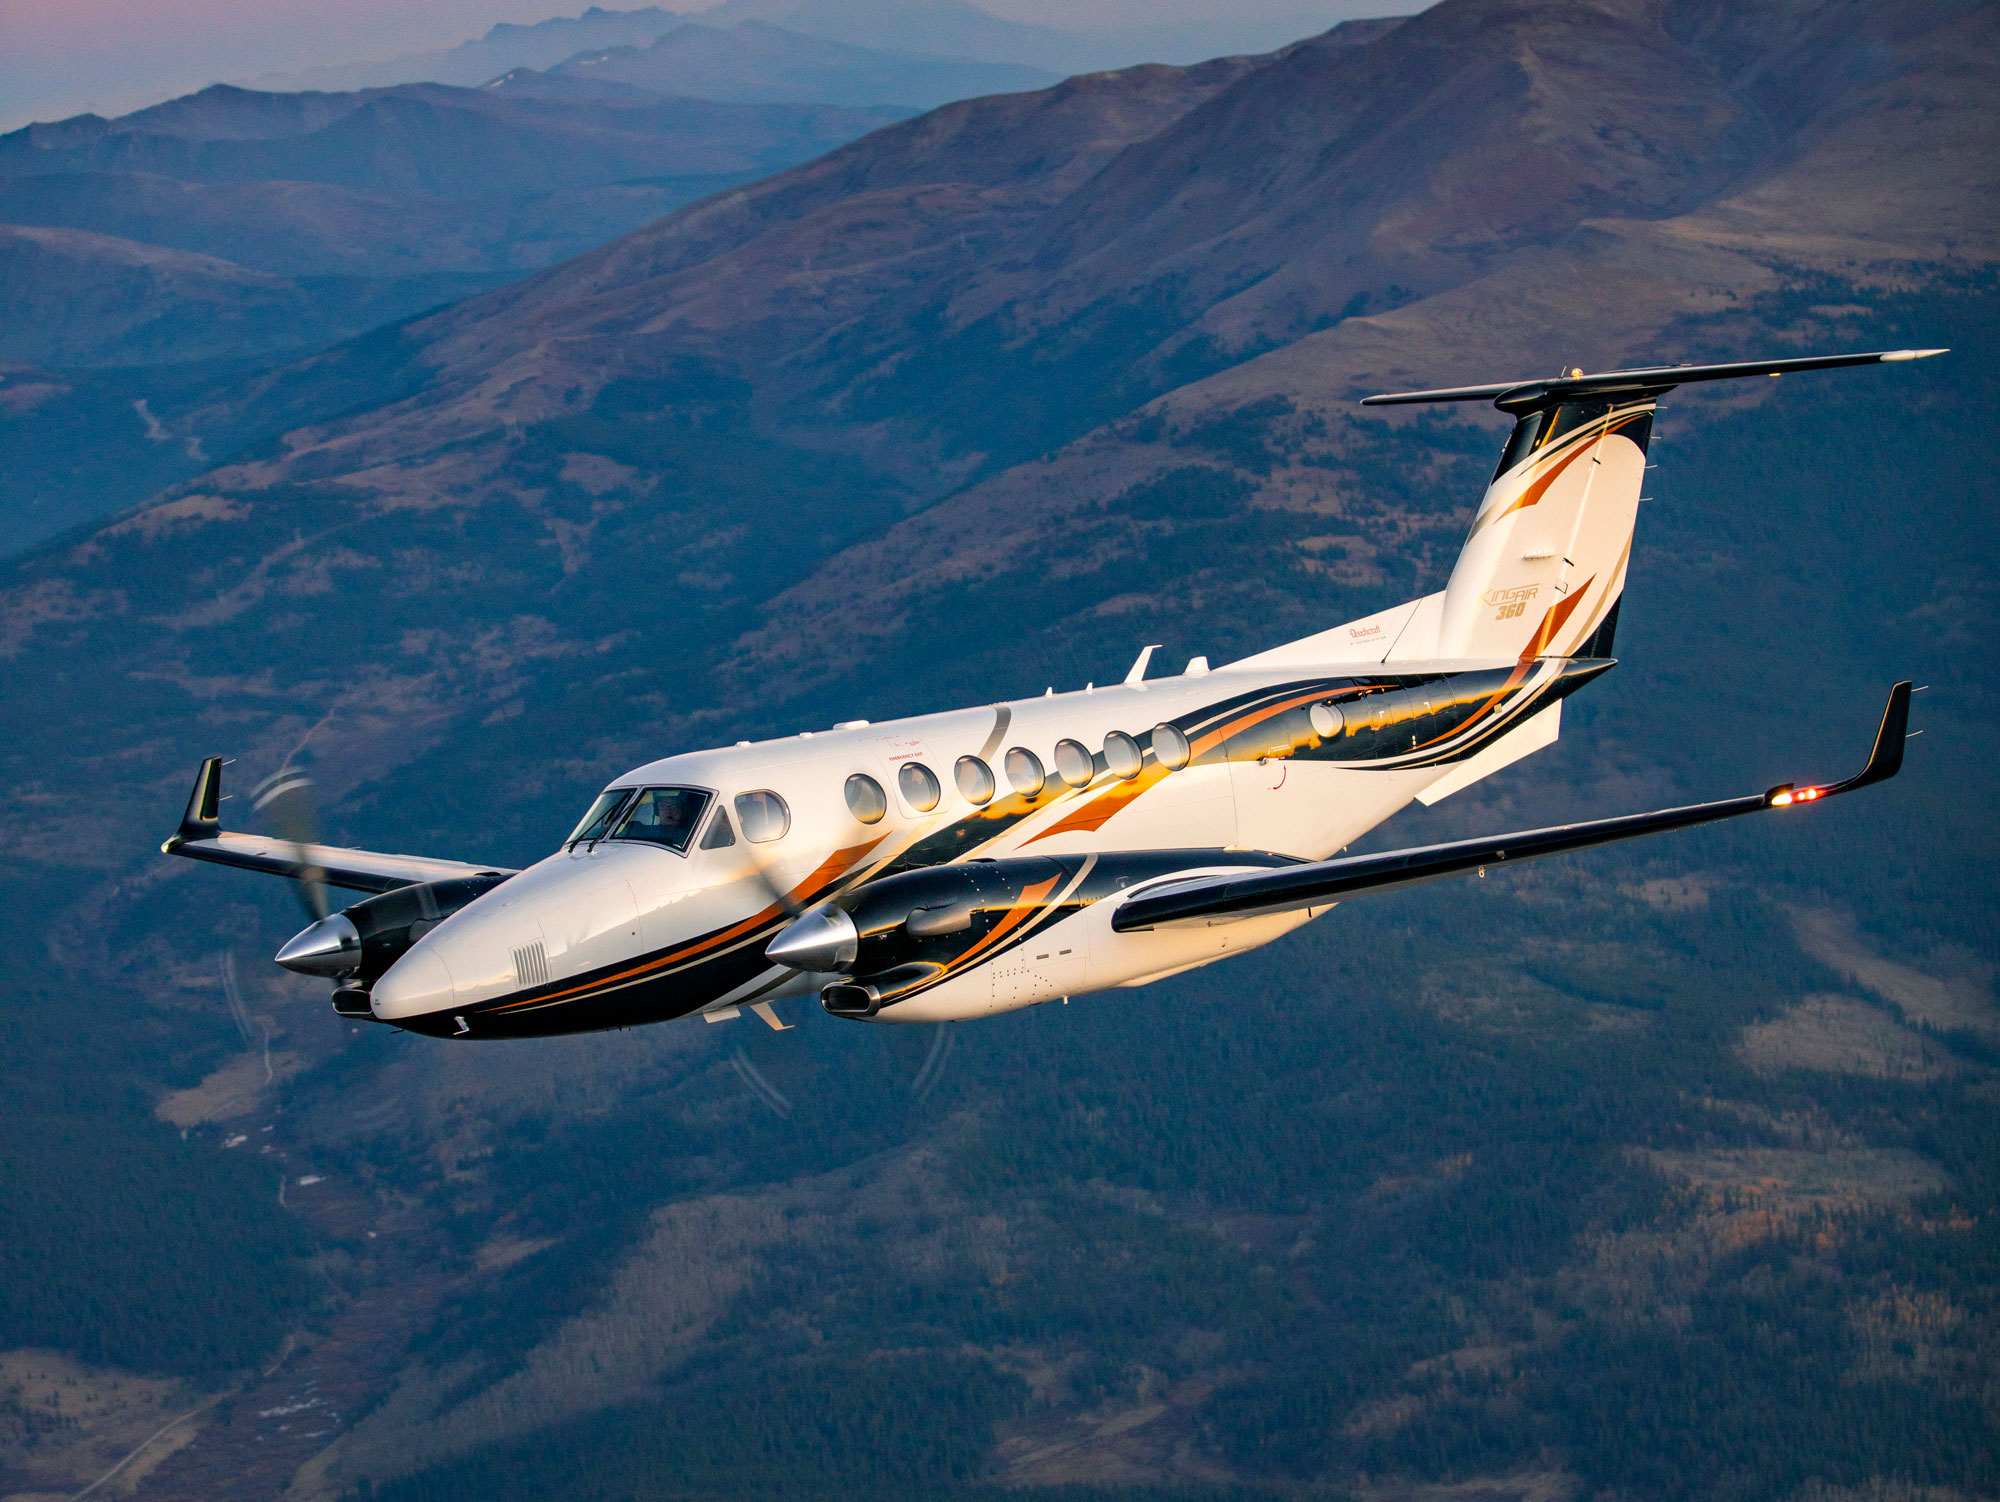 Beechcraft King Air 360/360ER and 260 aircraft achieve EASA certification, paving way for European deliveries